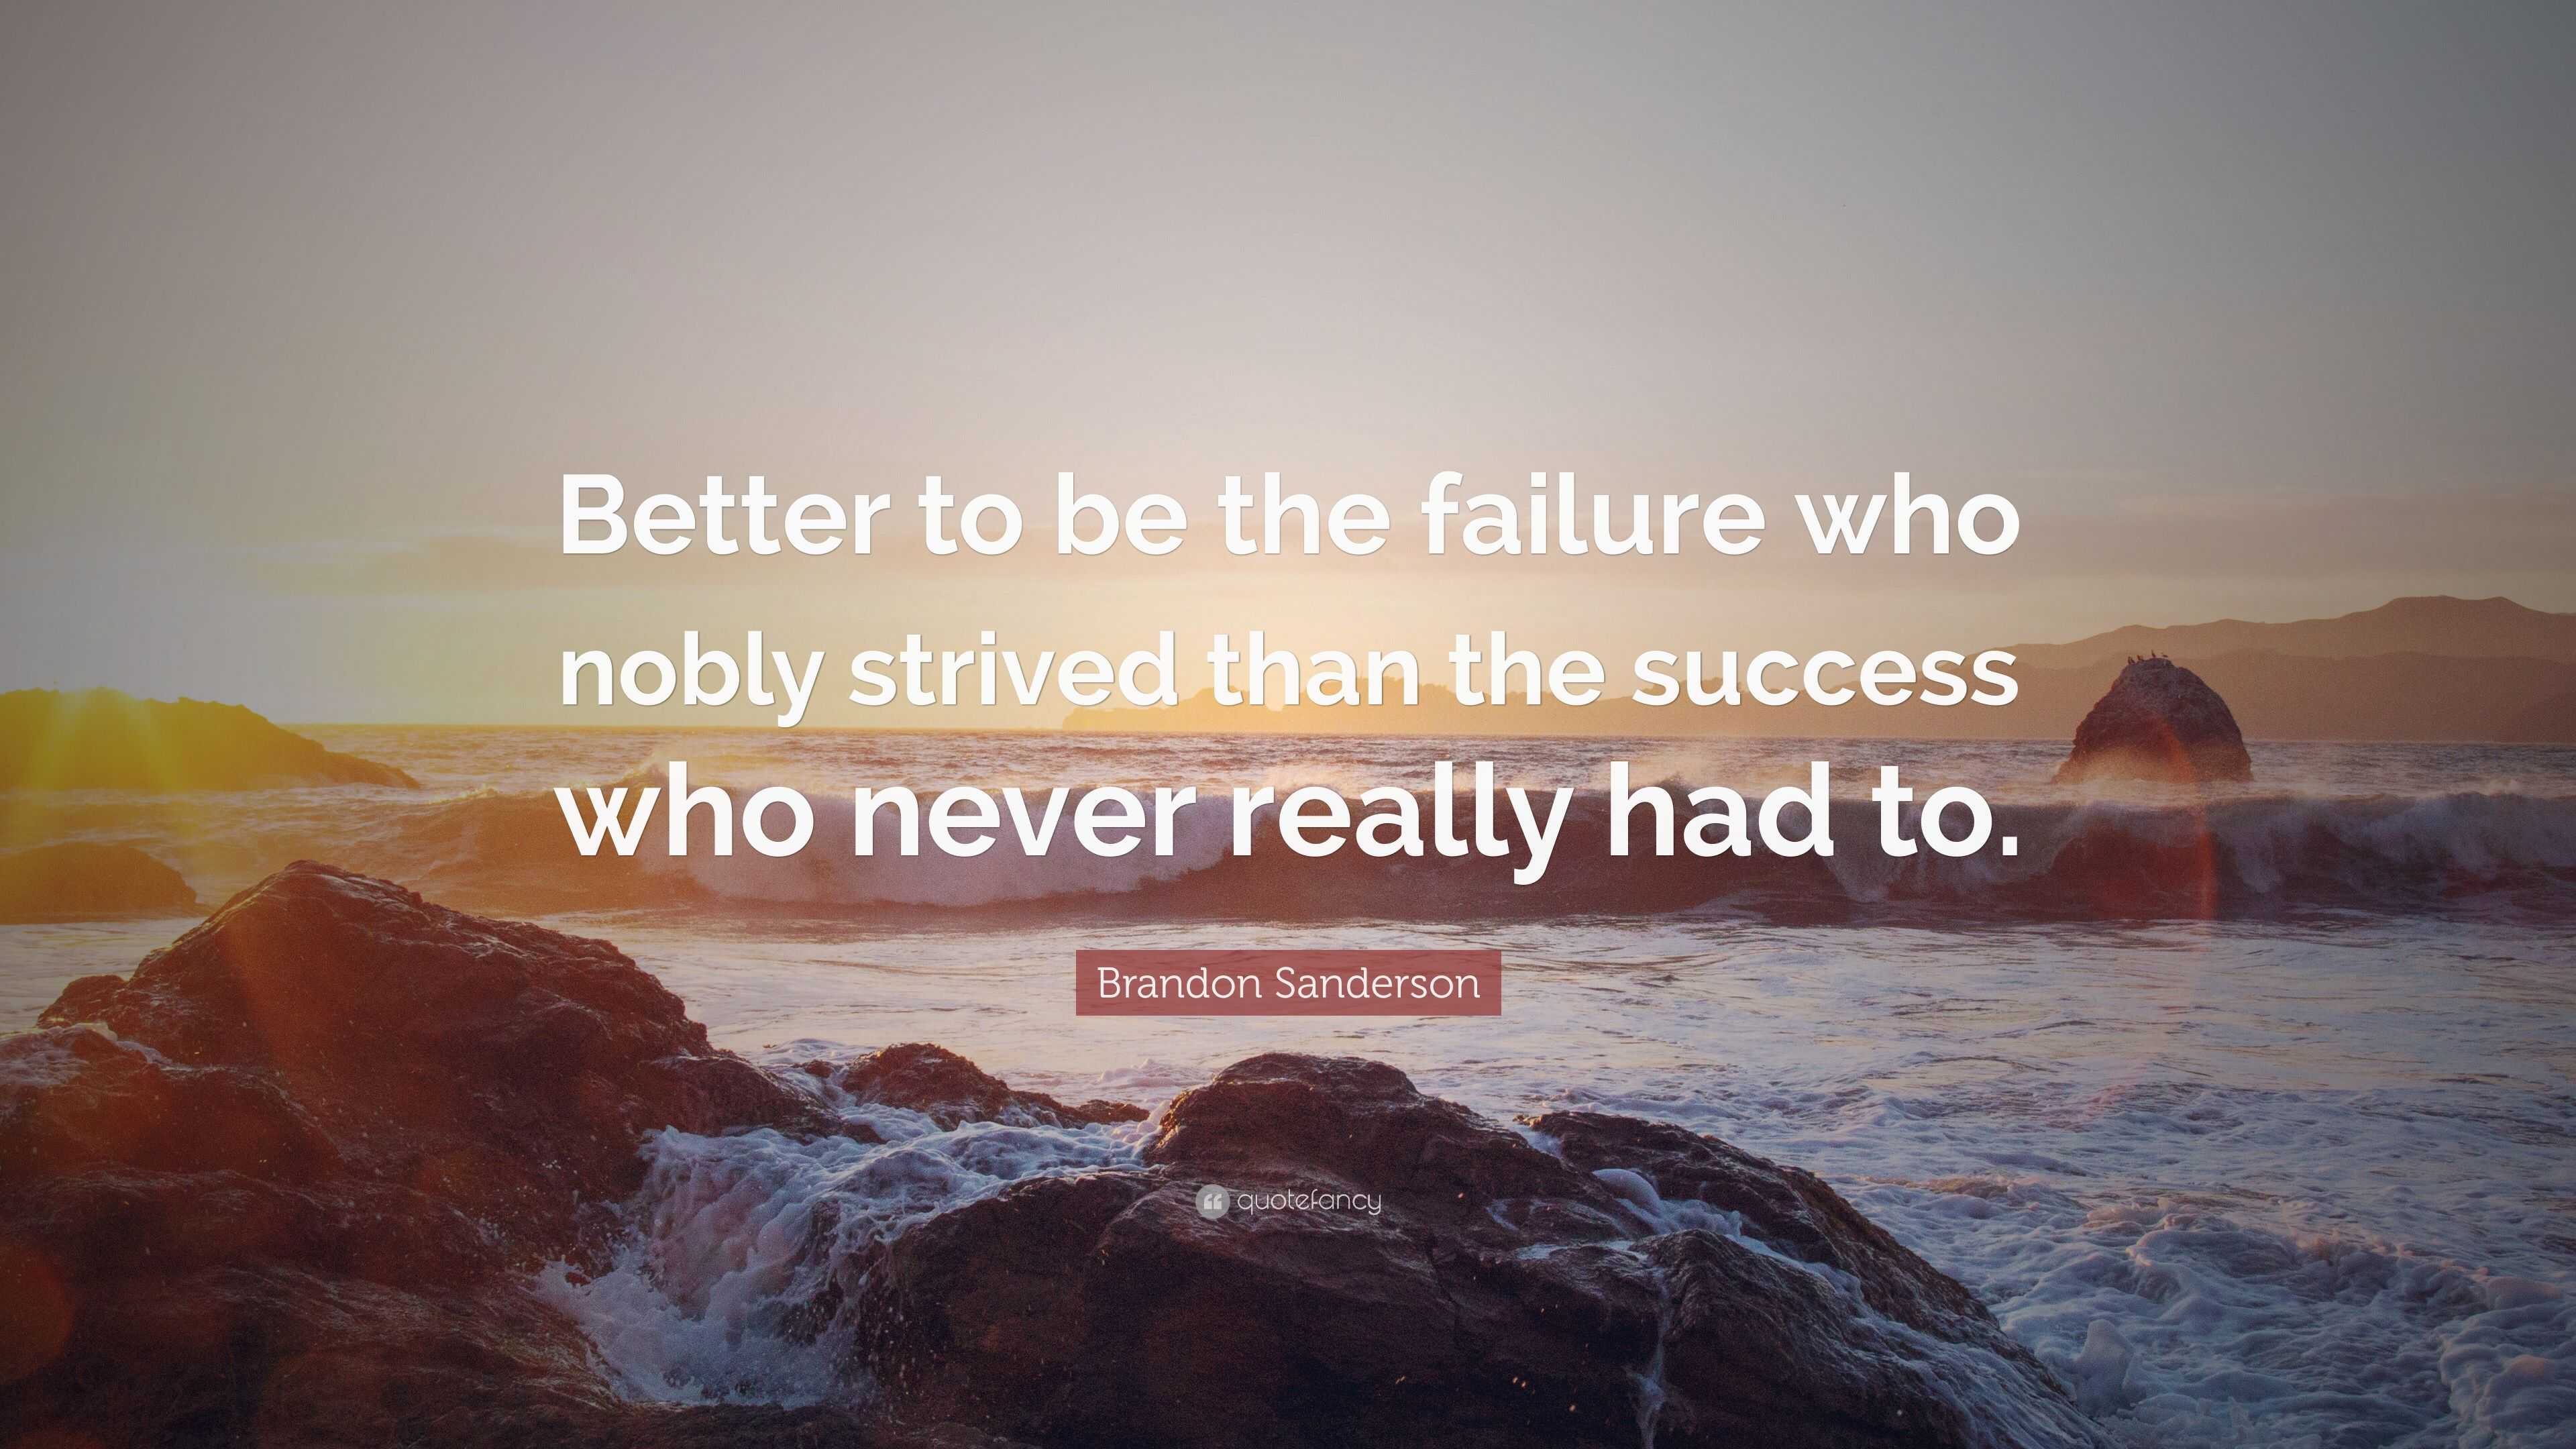 Brandon Sanderson Quote: “Better to be the failure who nobly strived ...